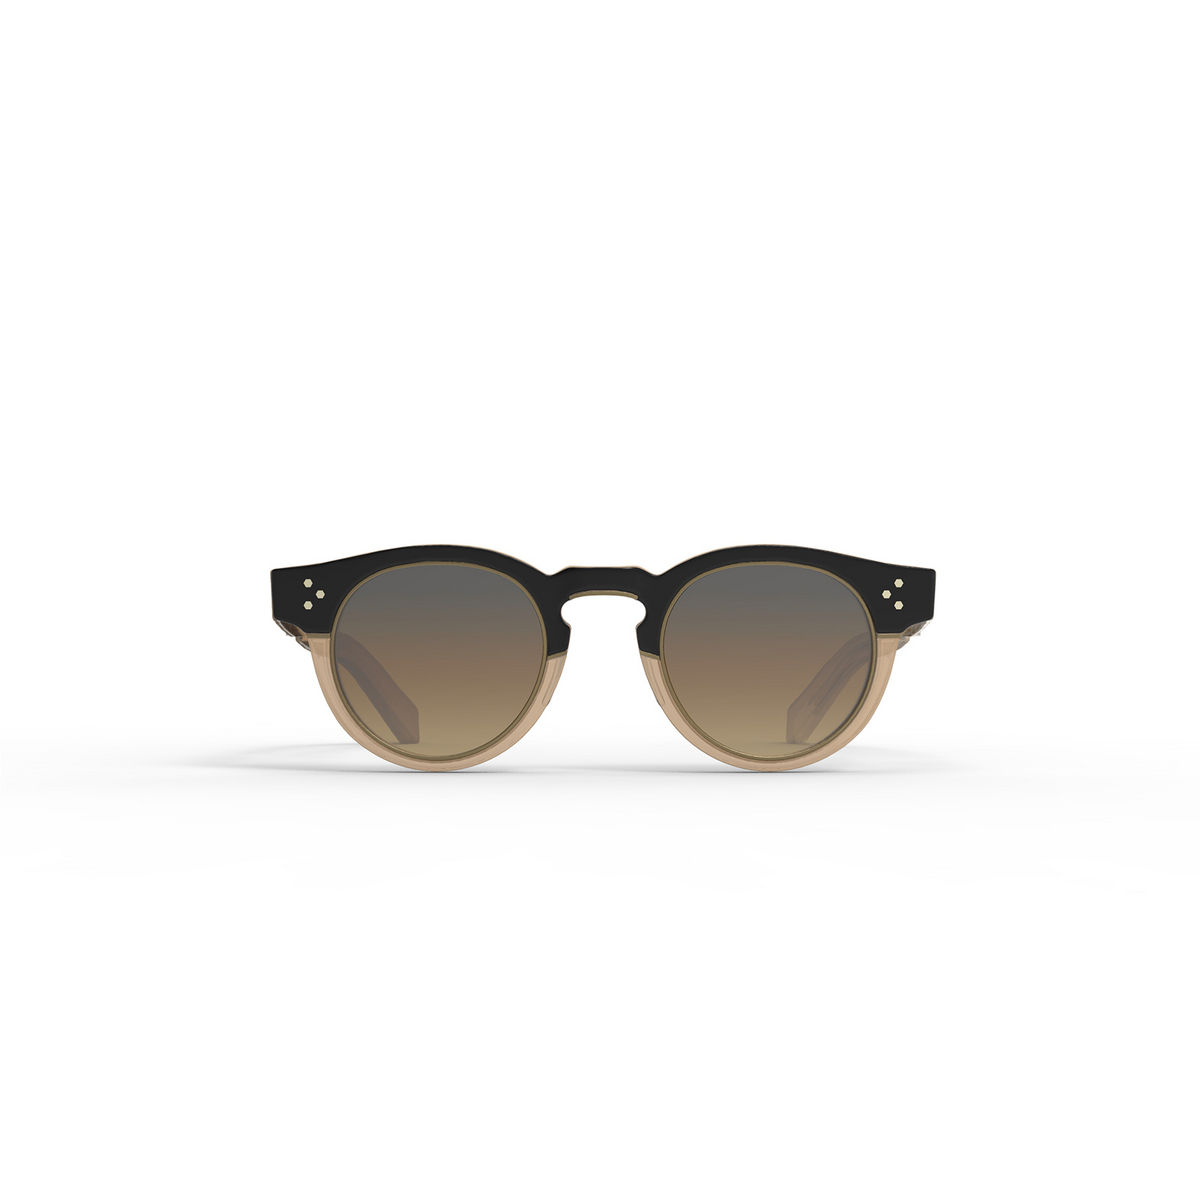 Mr. Leight KENNEDY S Sunglasses BKTR-ATG/SMKY Black Tar-Antique Gold - front view